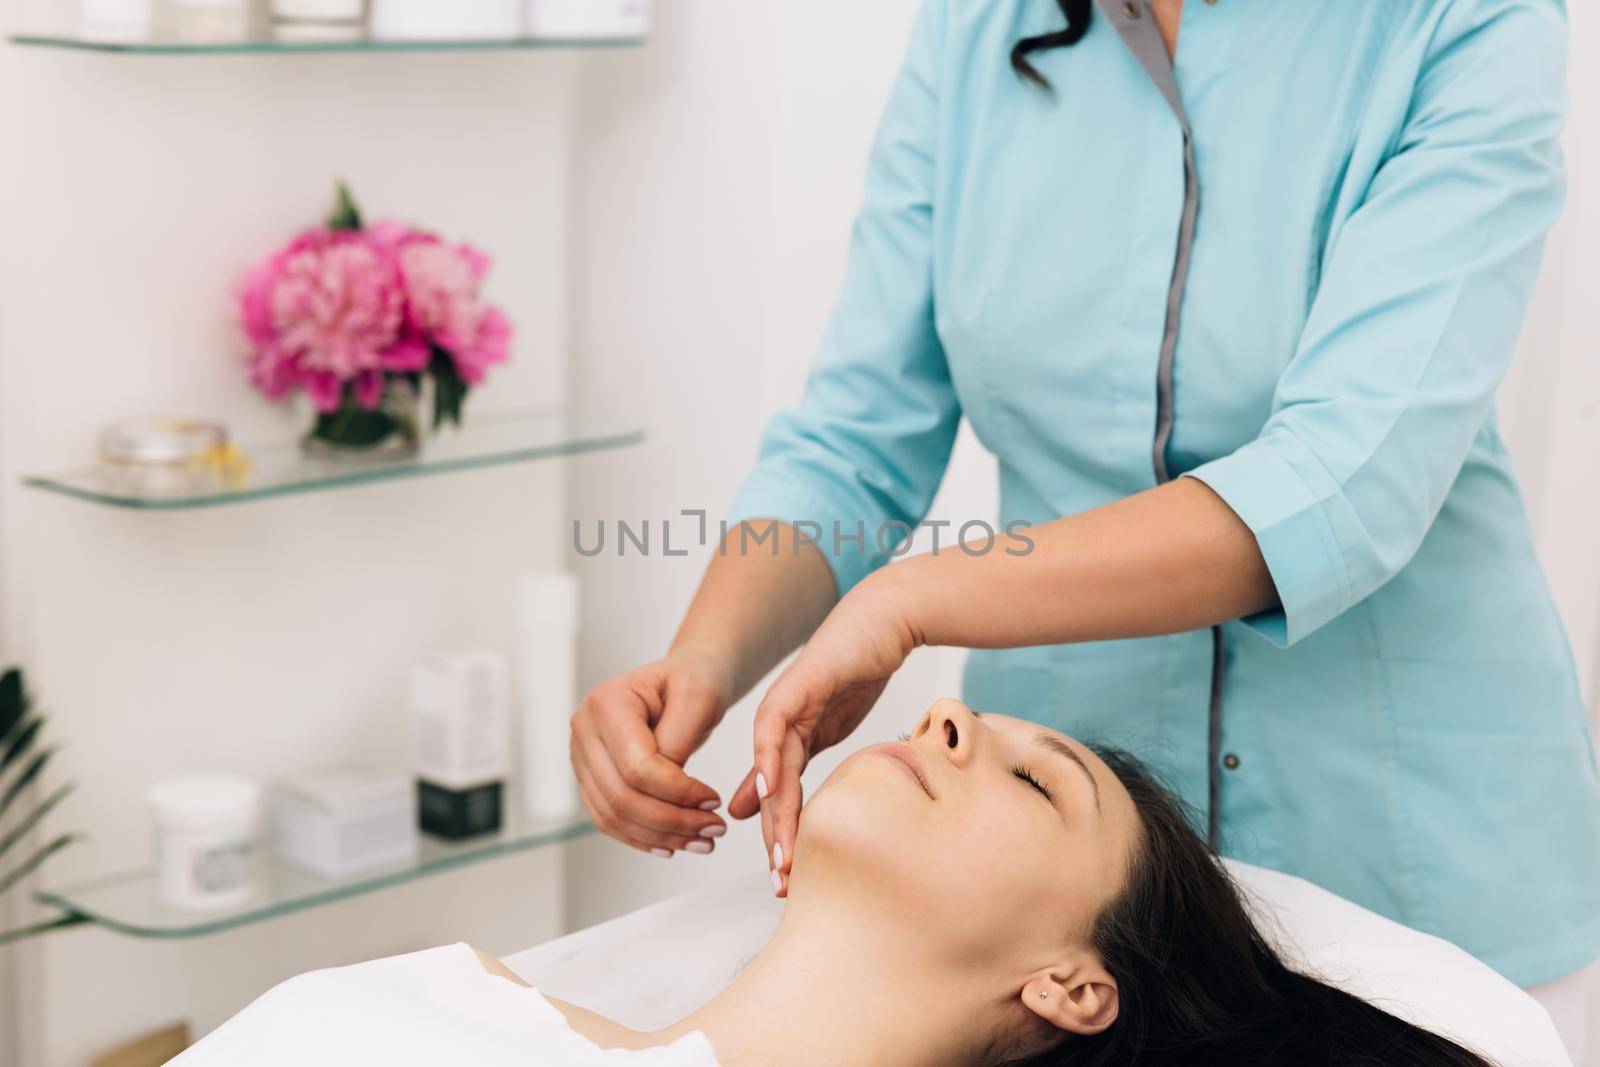 Face Massage in beauty spa salon. Beauty Treatments. Body care, skin care, wellness, wellbeing, beauty treatment concept. Spa facial Massage by uflypro